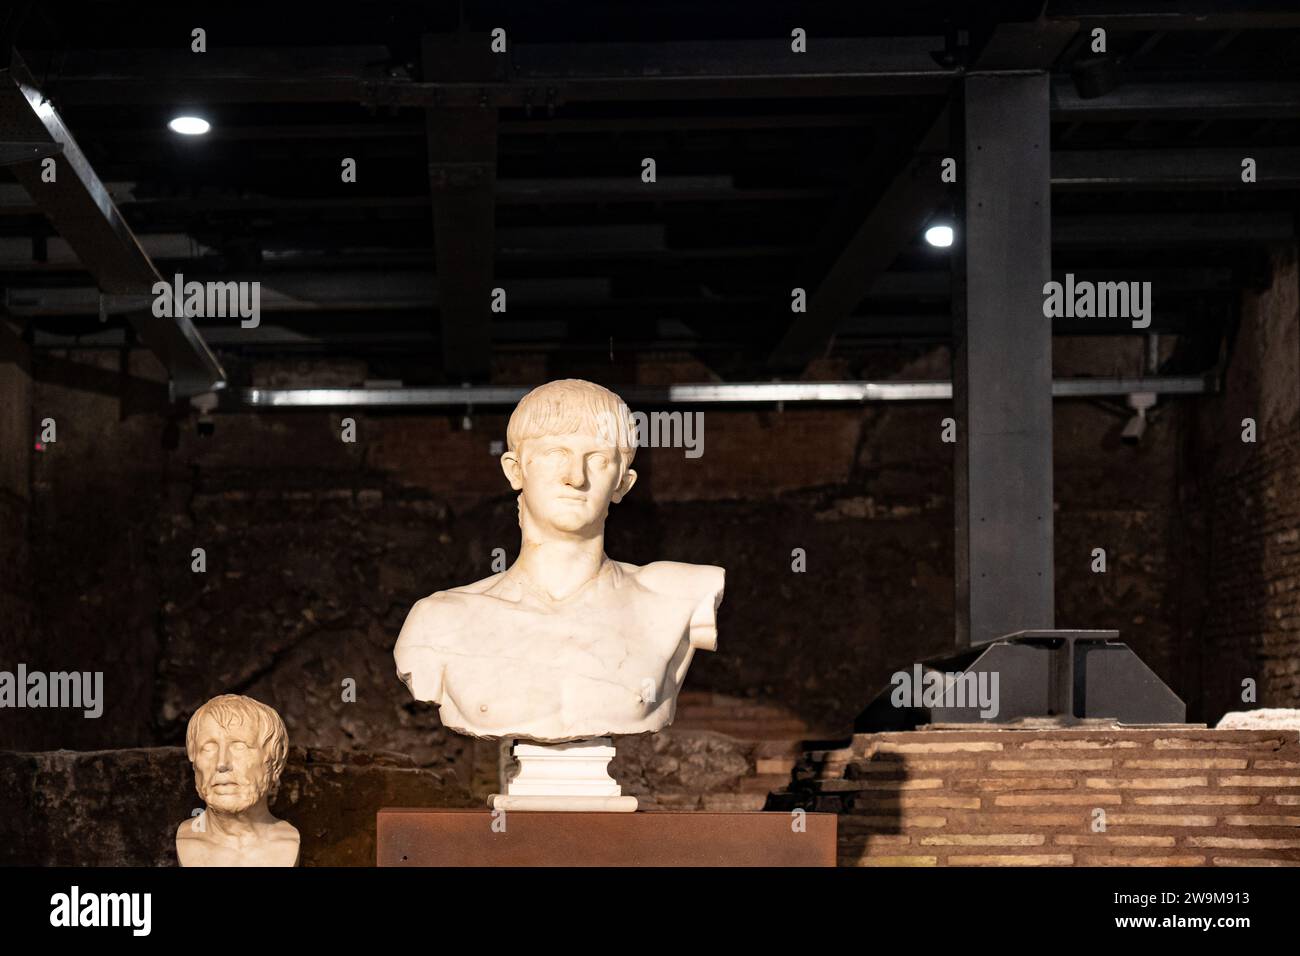 Emperor Nero Marble Bust, the Domus Aurea and Egypt Exhibition in Rome, Italy. Stock Photo